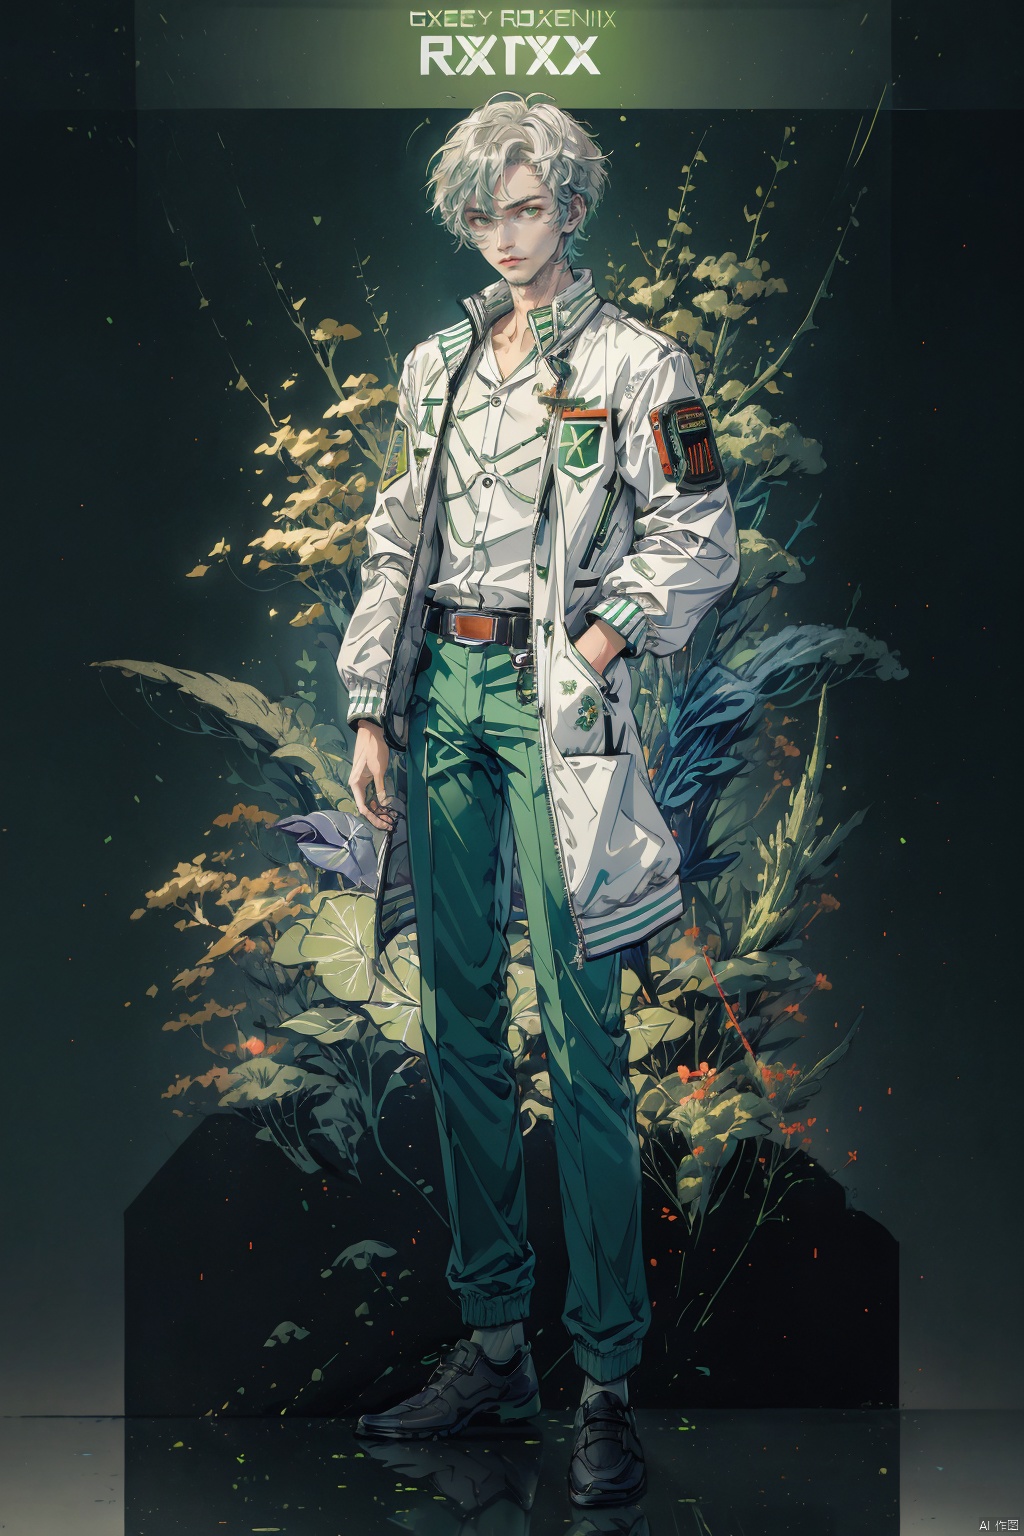  (masterpiece), (best quality),Science fiction, RGB, RTX, graphics card, graphics card fan, green fluorescent tube,Solid color background, 1 boy, over 20 years old, outgoing, sunny and handsome, Green pants, white jacket, Stand up collar jacket, (sci-fi style), Silver short hair, white belt, Green pupils, solo,